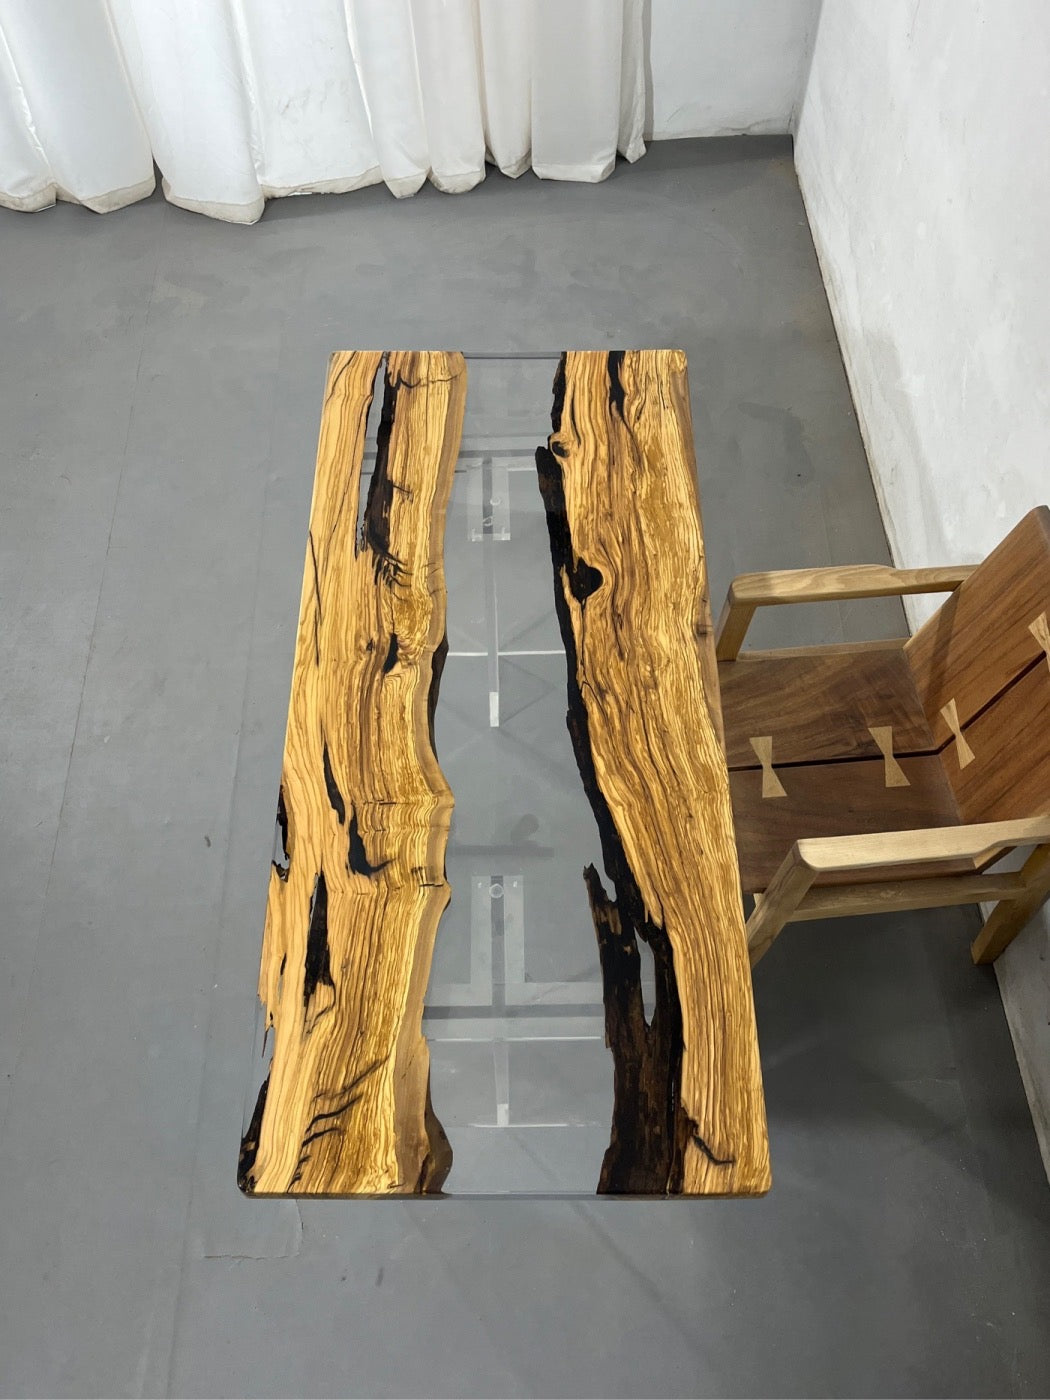 Oliven Epoxy Table, Olive Wood River Table, Poplar Epoxy Table